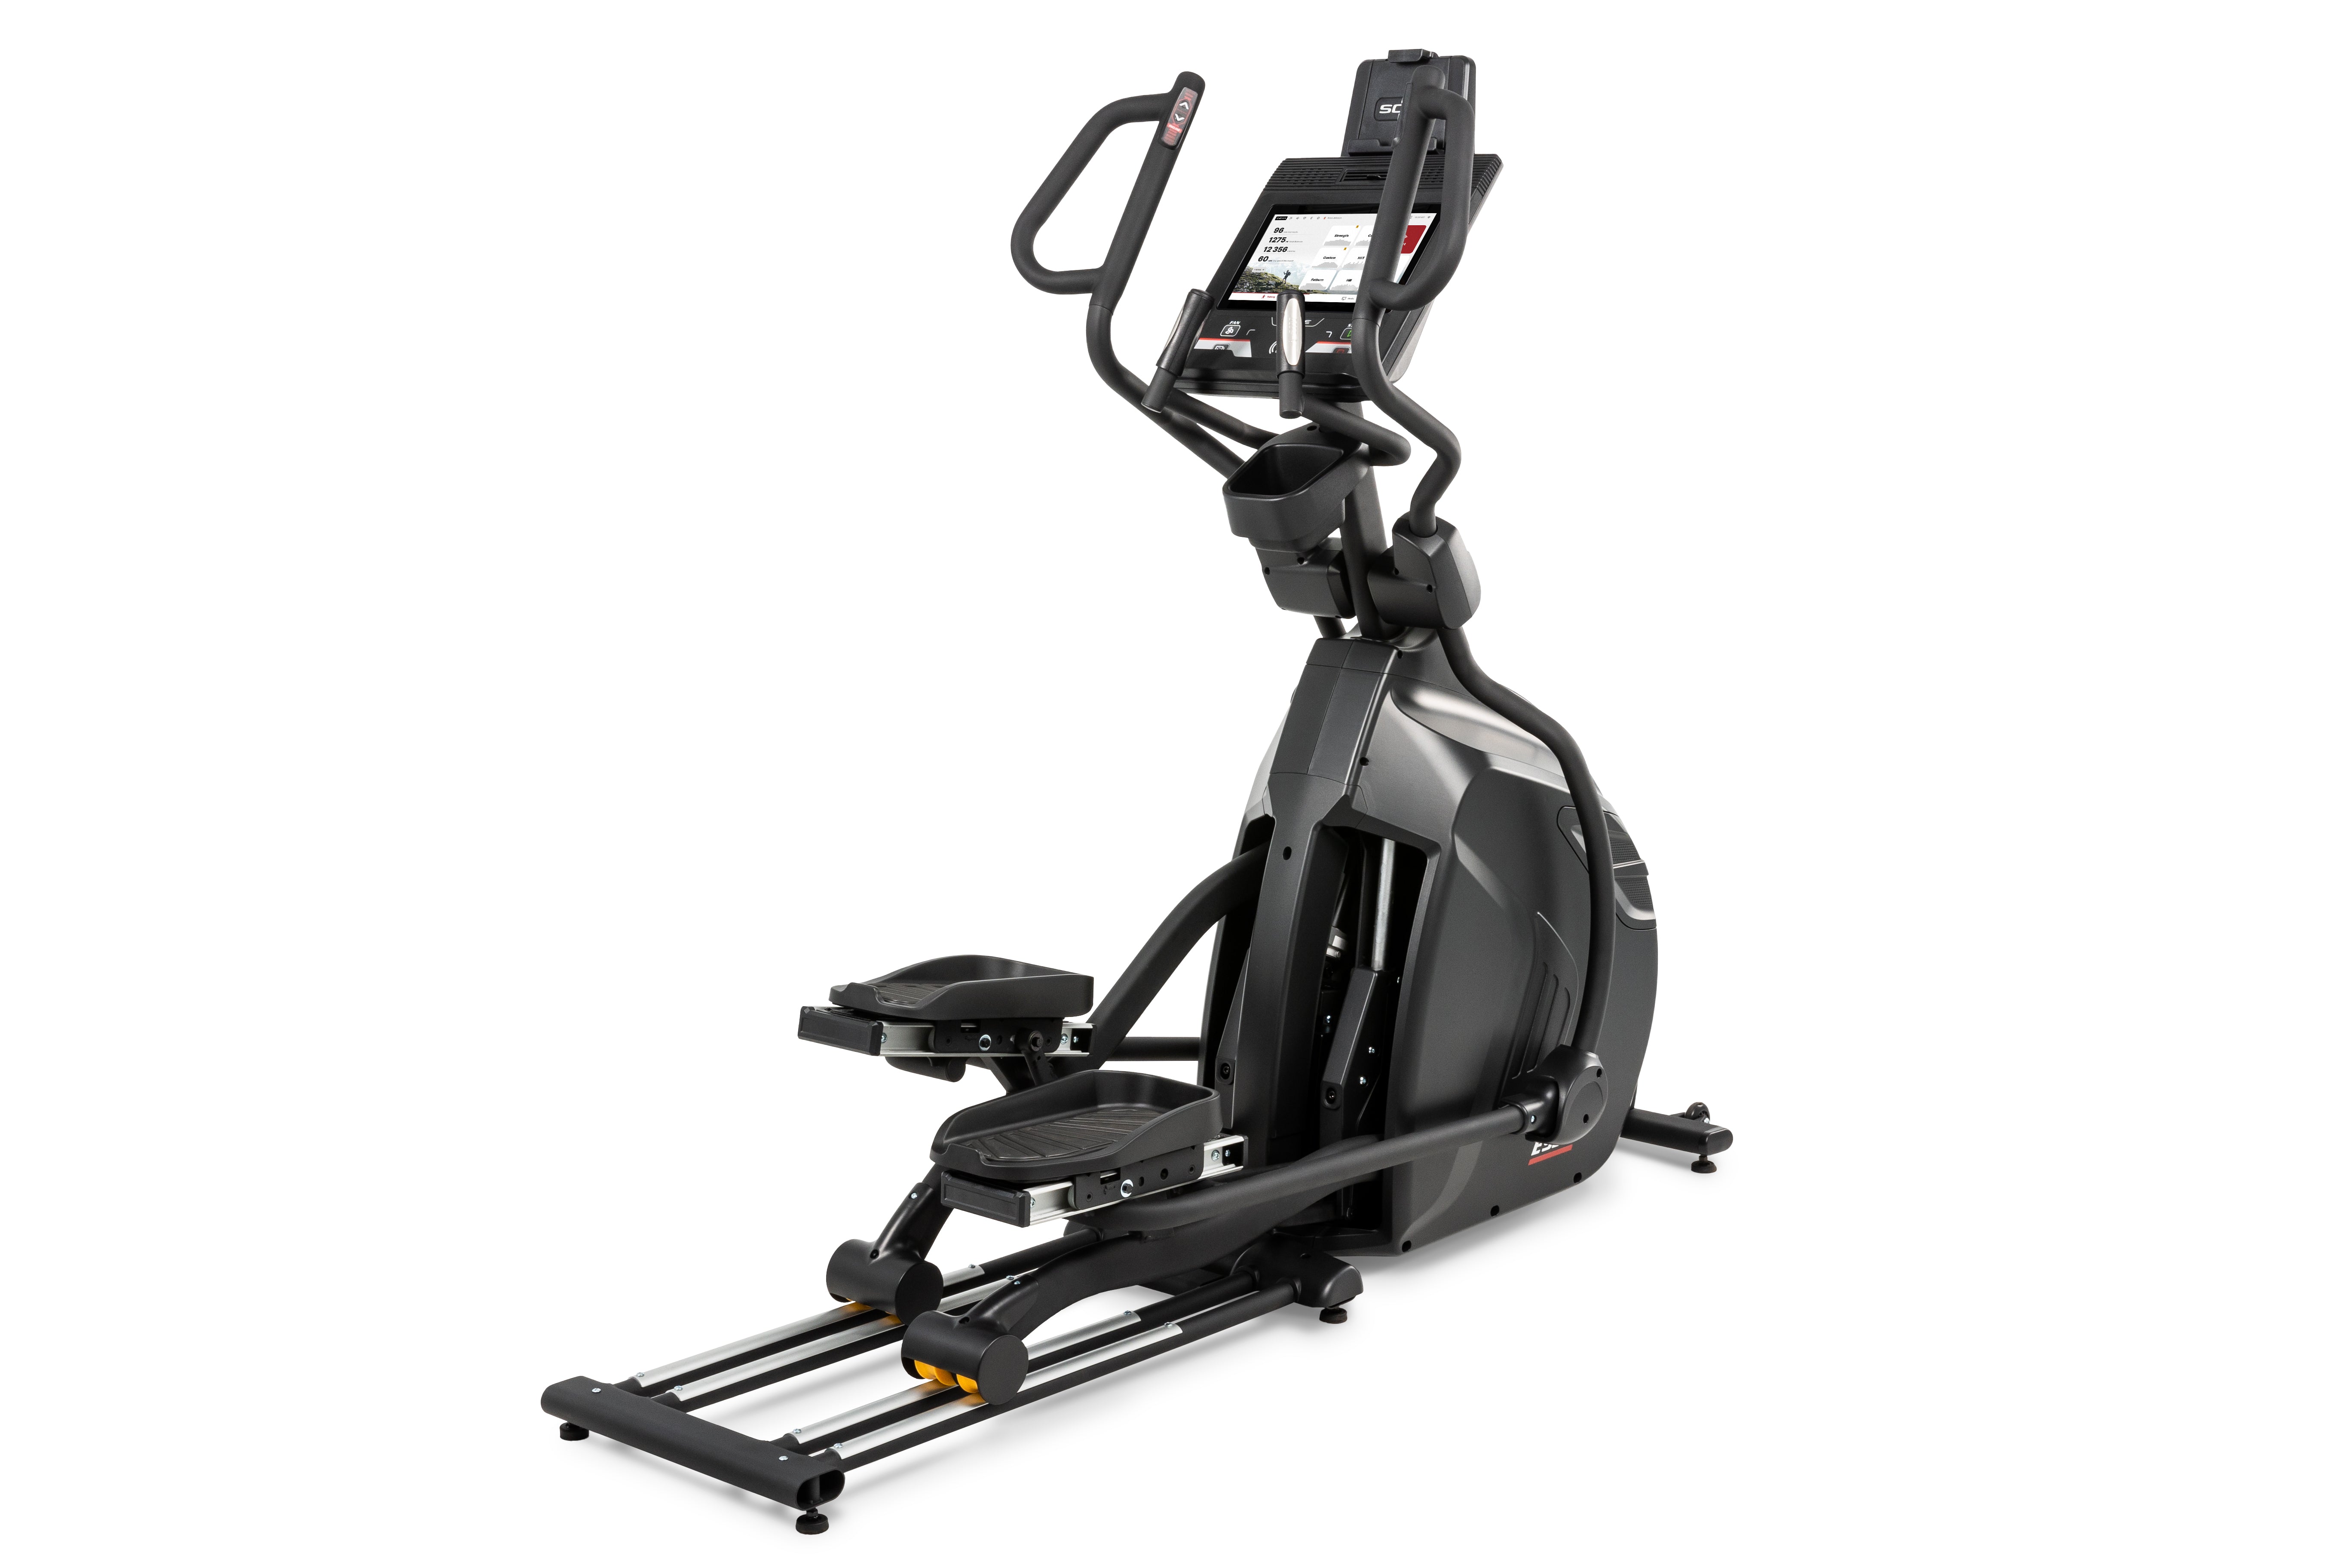 Angled view of the Sole E95S elliptical trainer featuring its adjustable foot pedals, ergonomic handlebars, a digital display screen, a central dark gray housing, and a black base with stabilizing wheels and a yellow folding release lever.